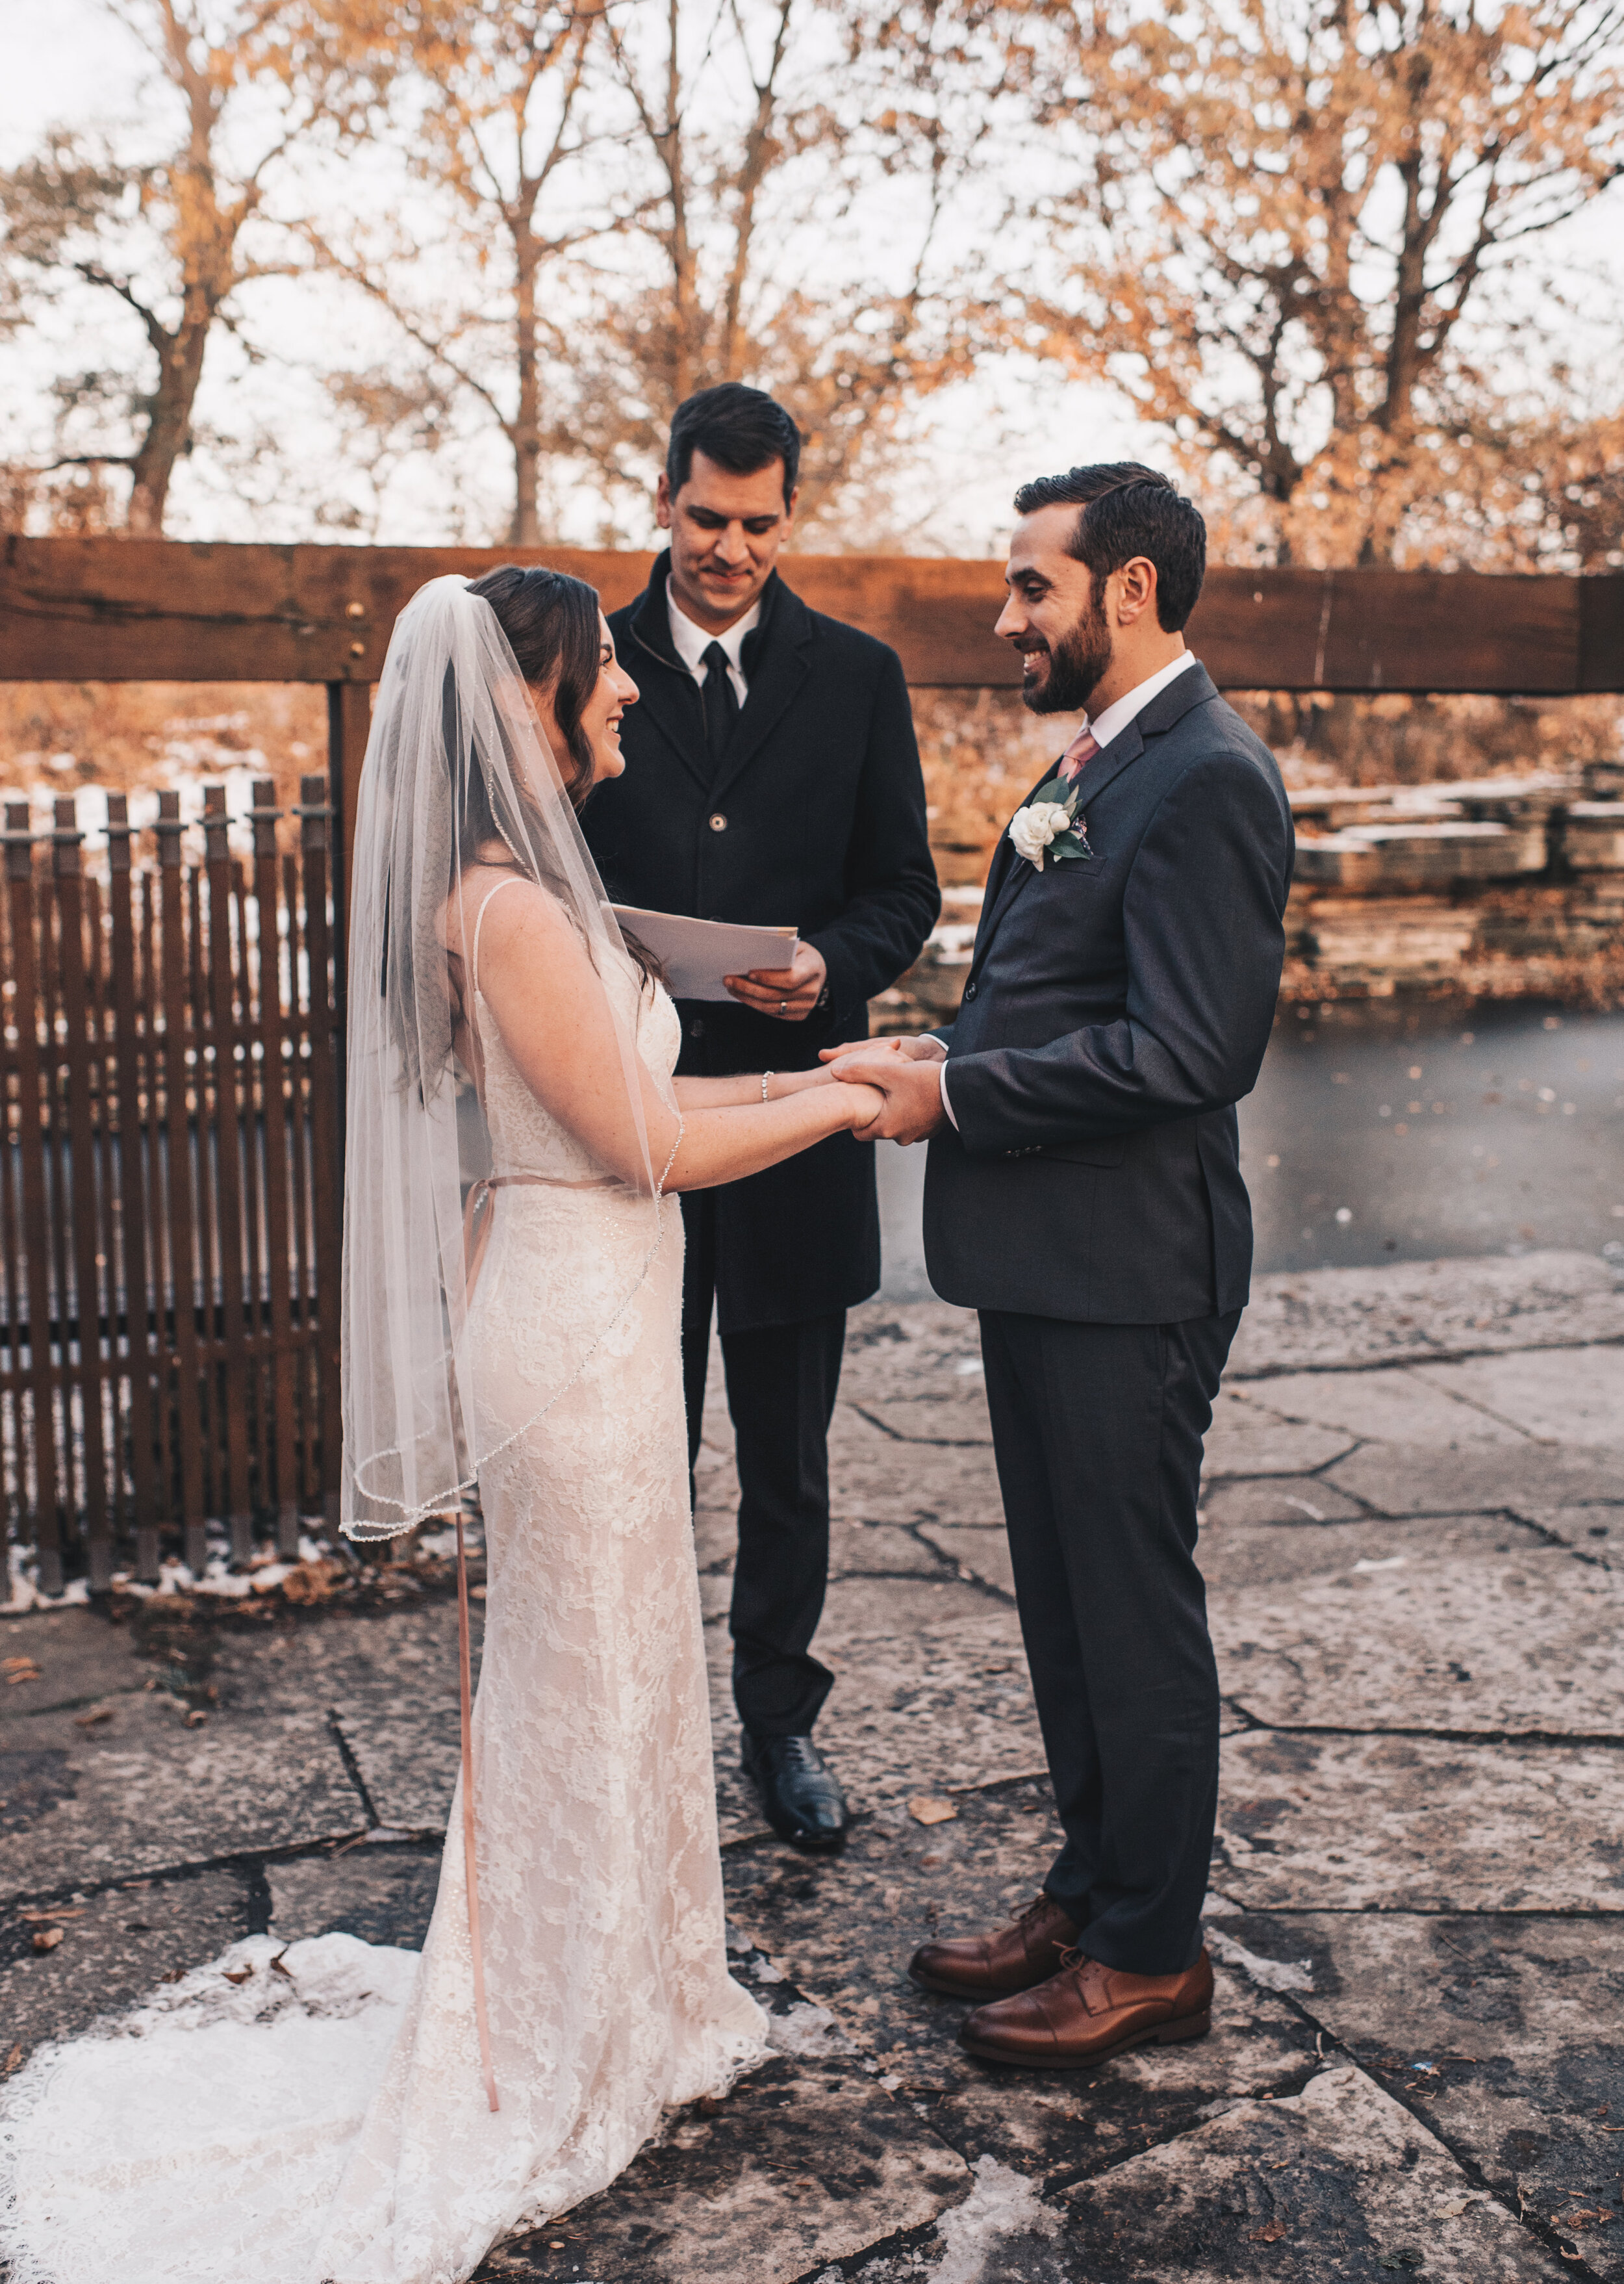 Chicago Wedding, Chicago Elopement, Modern Elegant Simple Wedding, Chicago Modern Elopement, Lincoln Park Zoo Wedding, Alfred Caldwell Lily Pool Wedding, Alfred Caldwell Lily Pool Ceremony